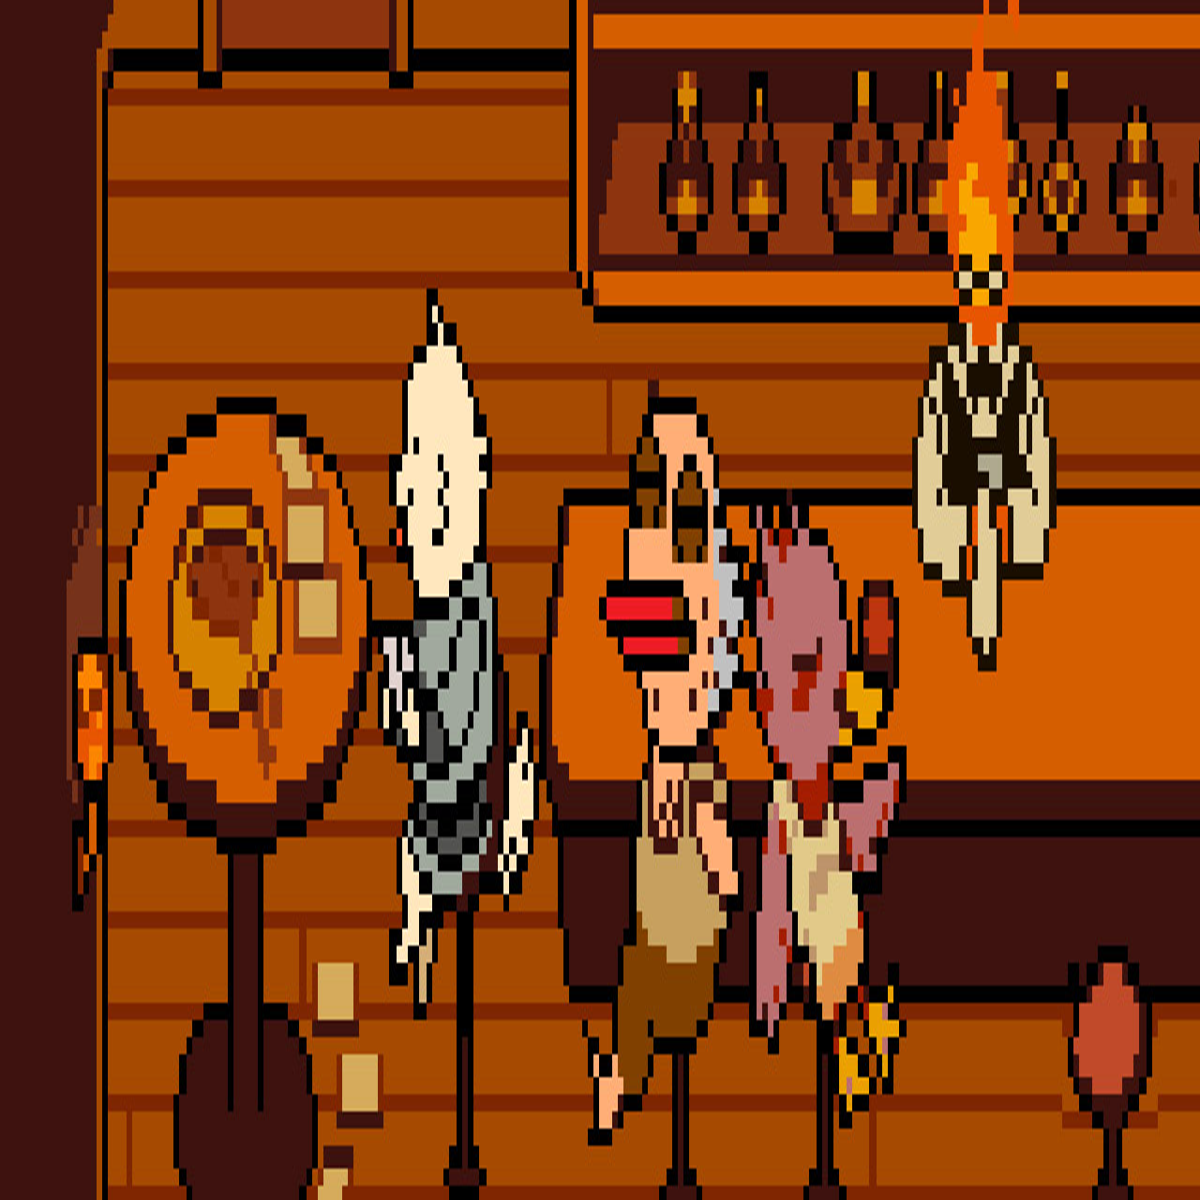 Grillby's bar. Undertale. Screenshot by the author.